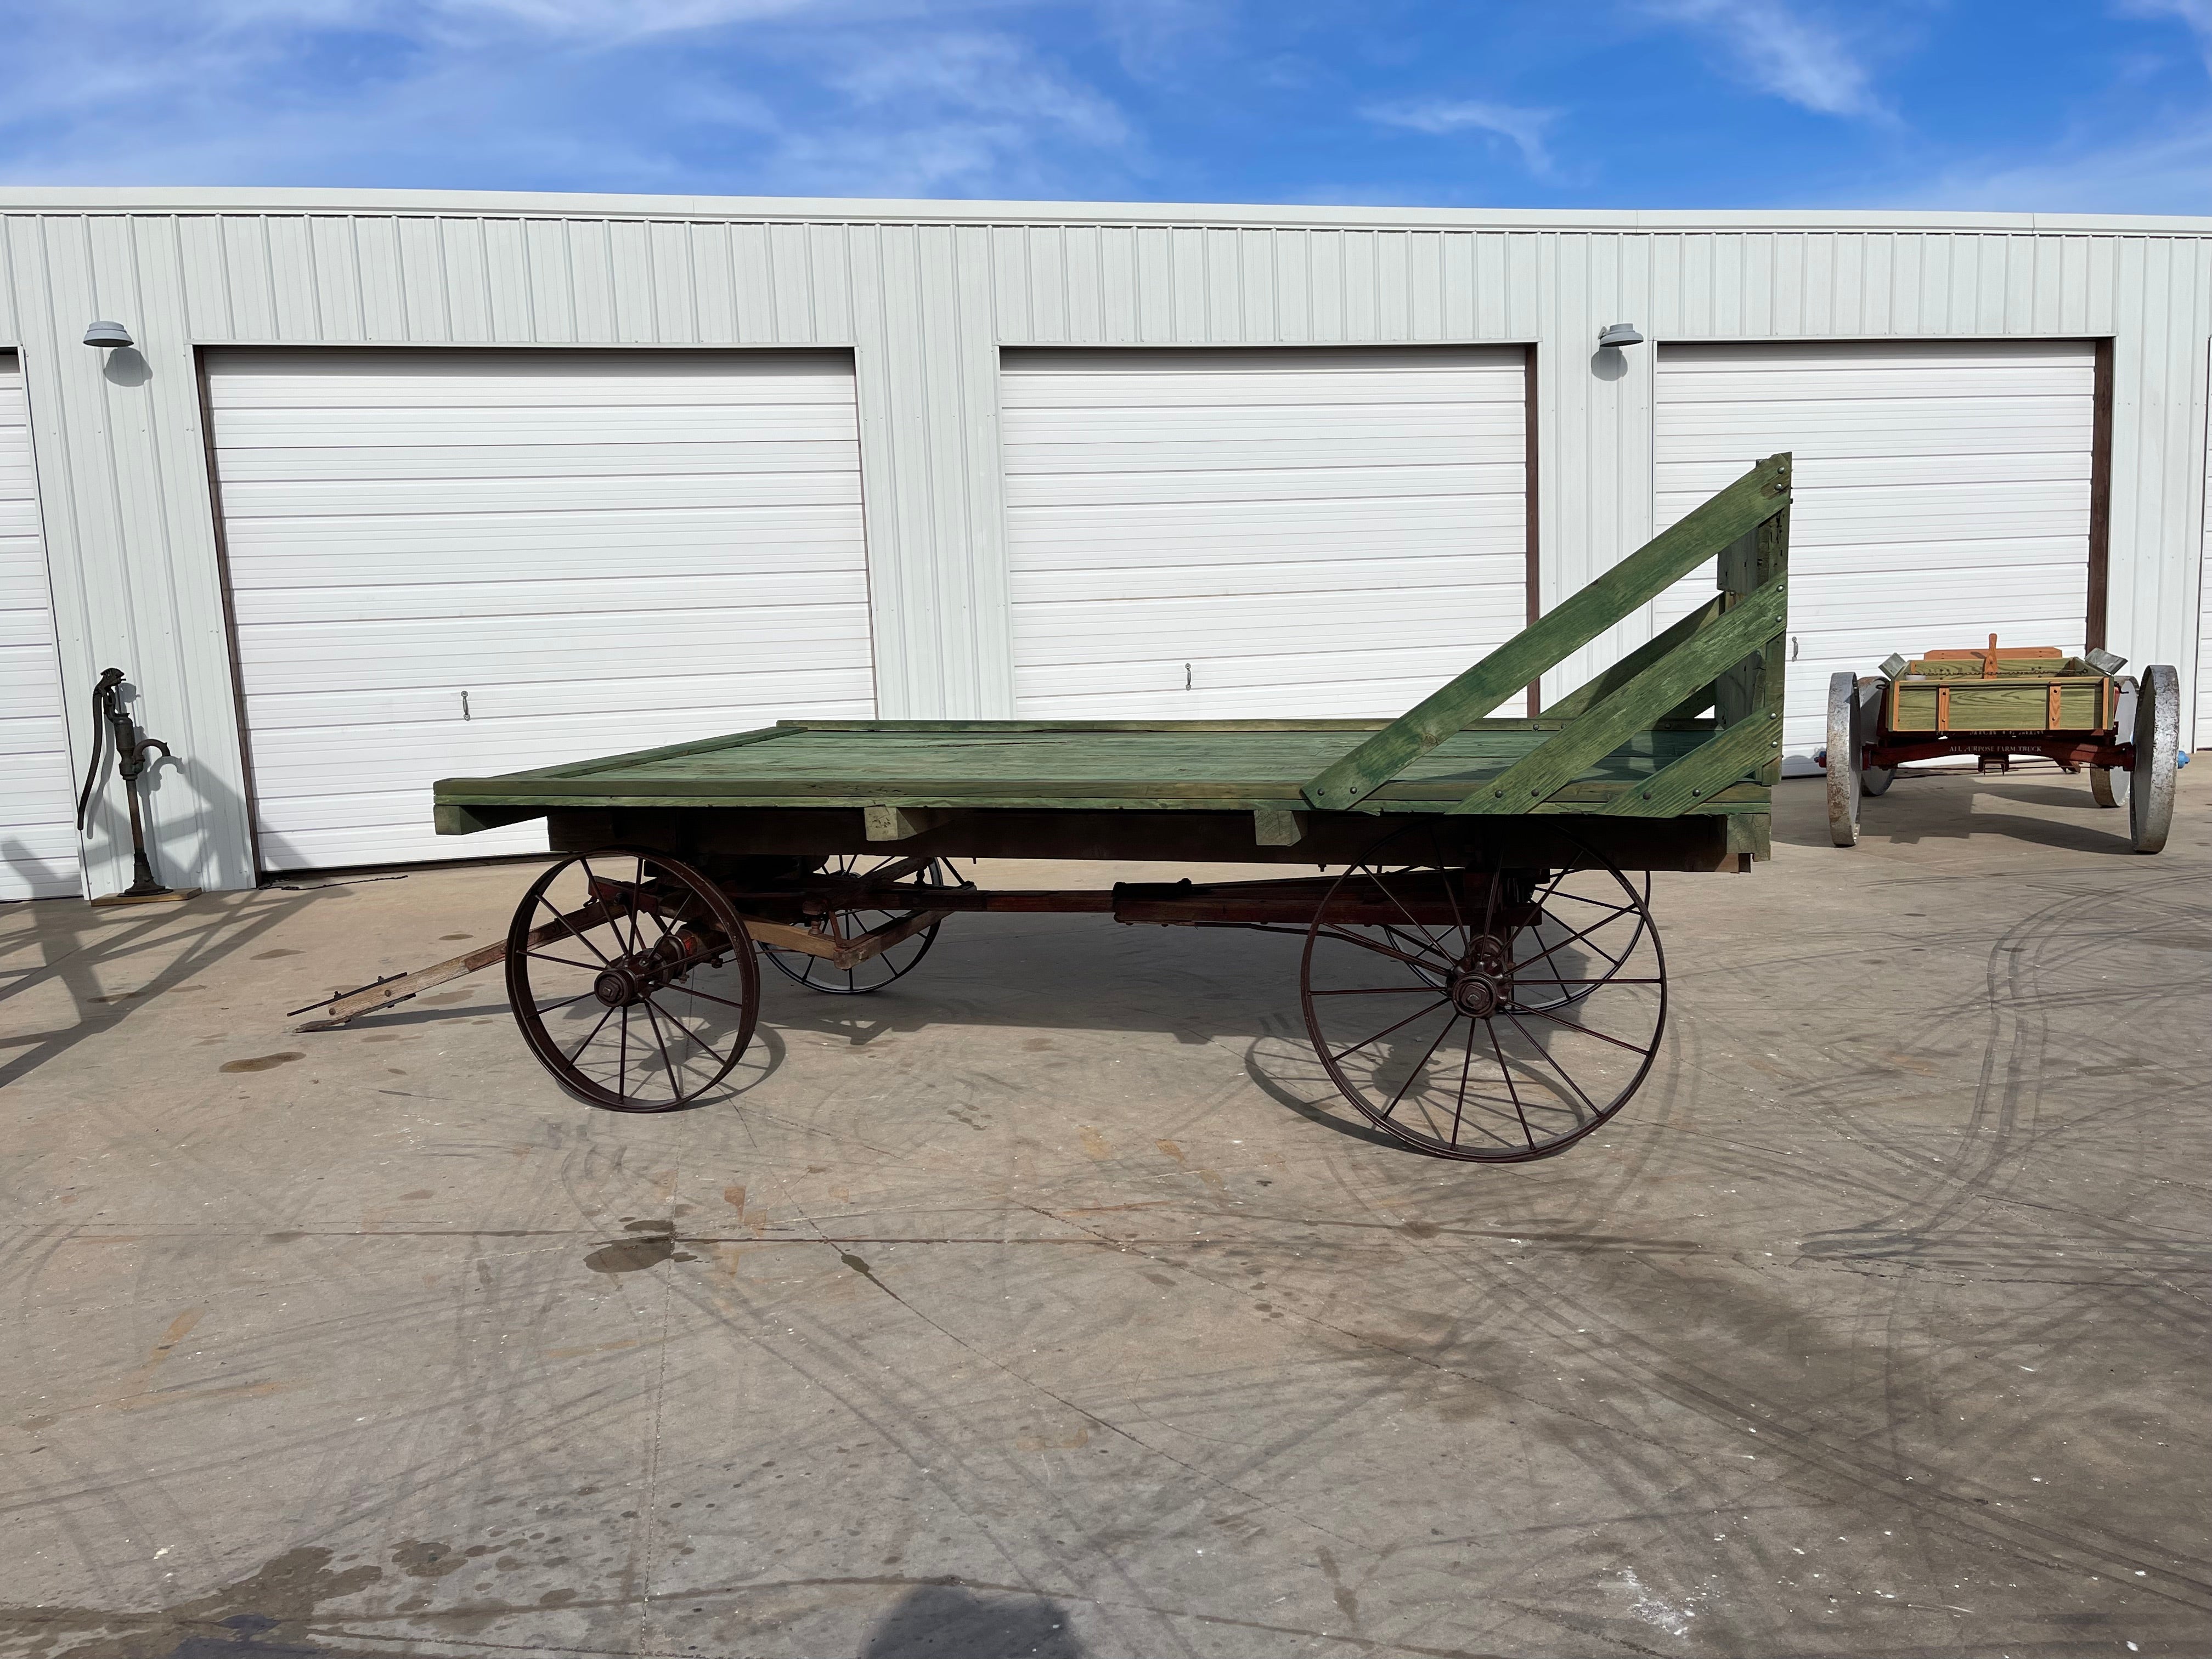 SOLD-Old Green Hay Wagon for Display